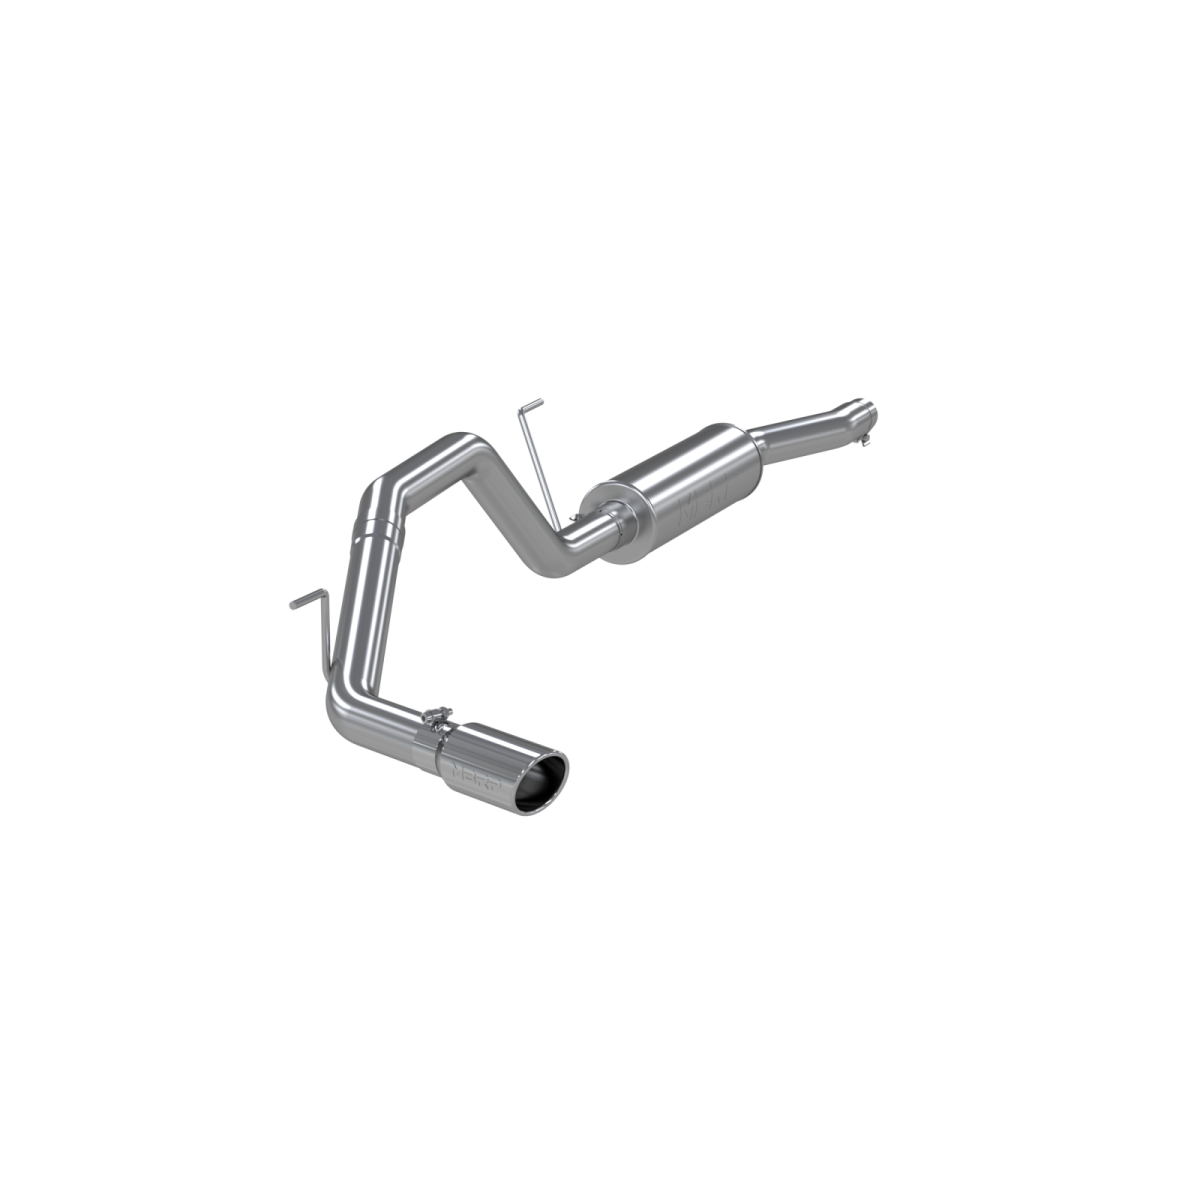 MBRP - MBRP Cat Back Exhaust System Single Side Aluminized Steel For 04-06 Nissan Titan 5.6L, Extended Cab/Crew Cab S5400AL